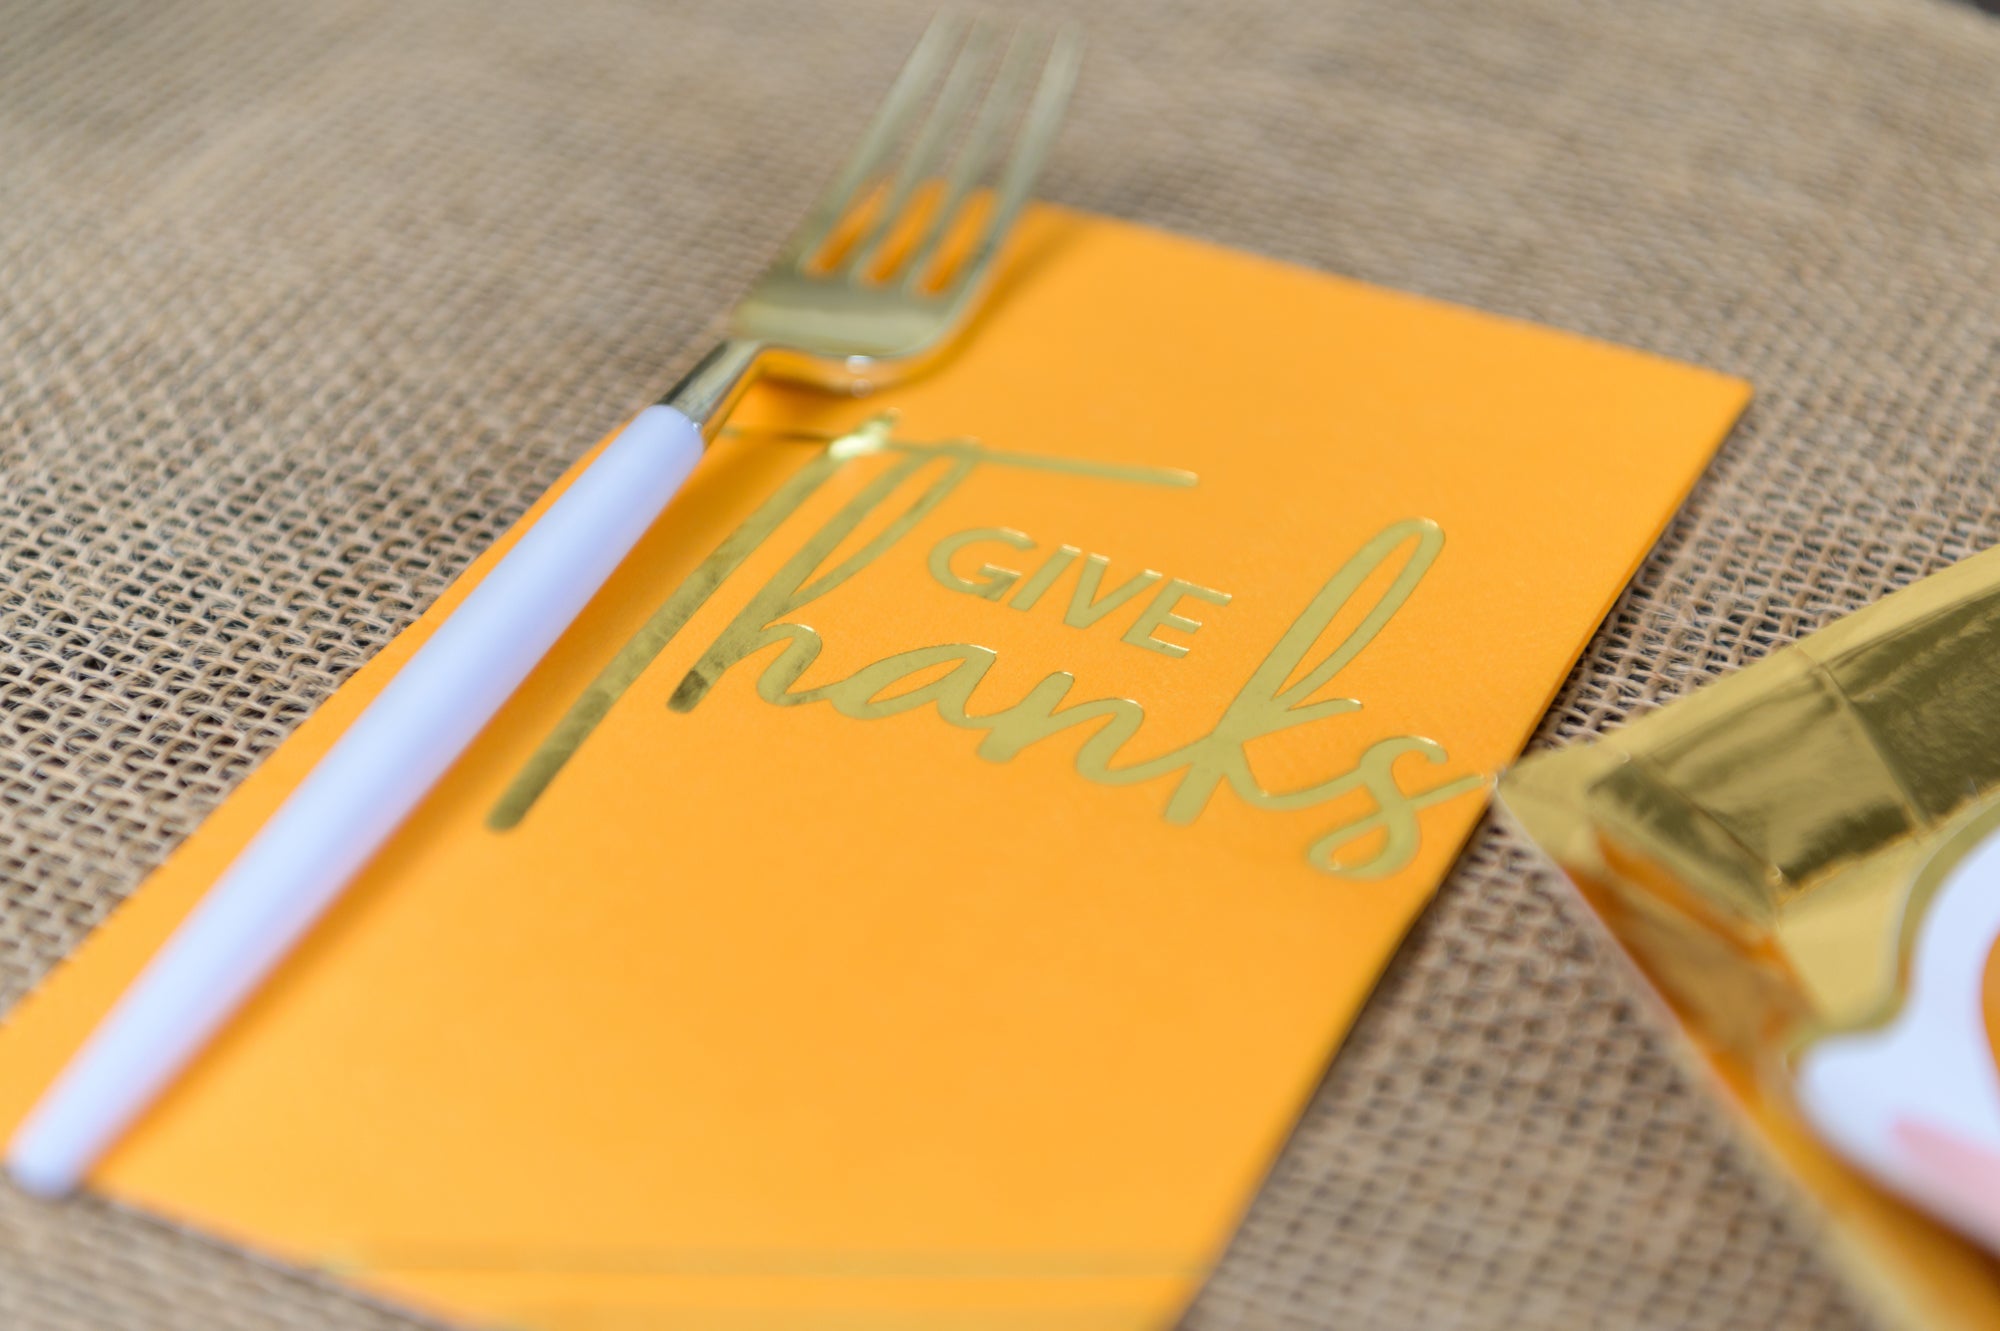 Give Thanks Fall Thanksgiving Guest Napkins - 16 ct